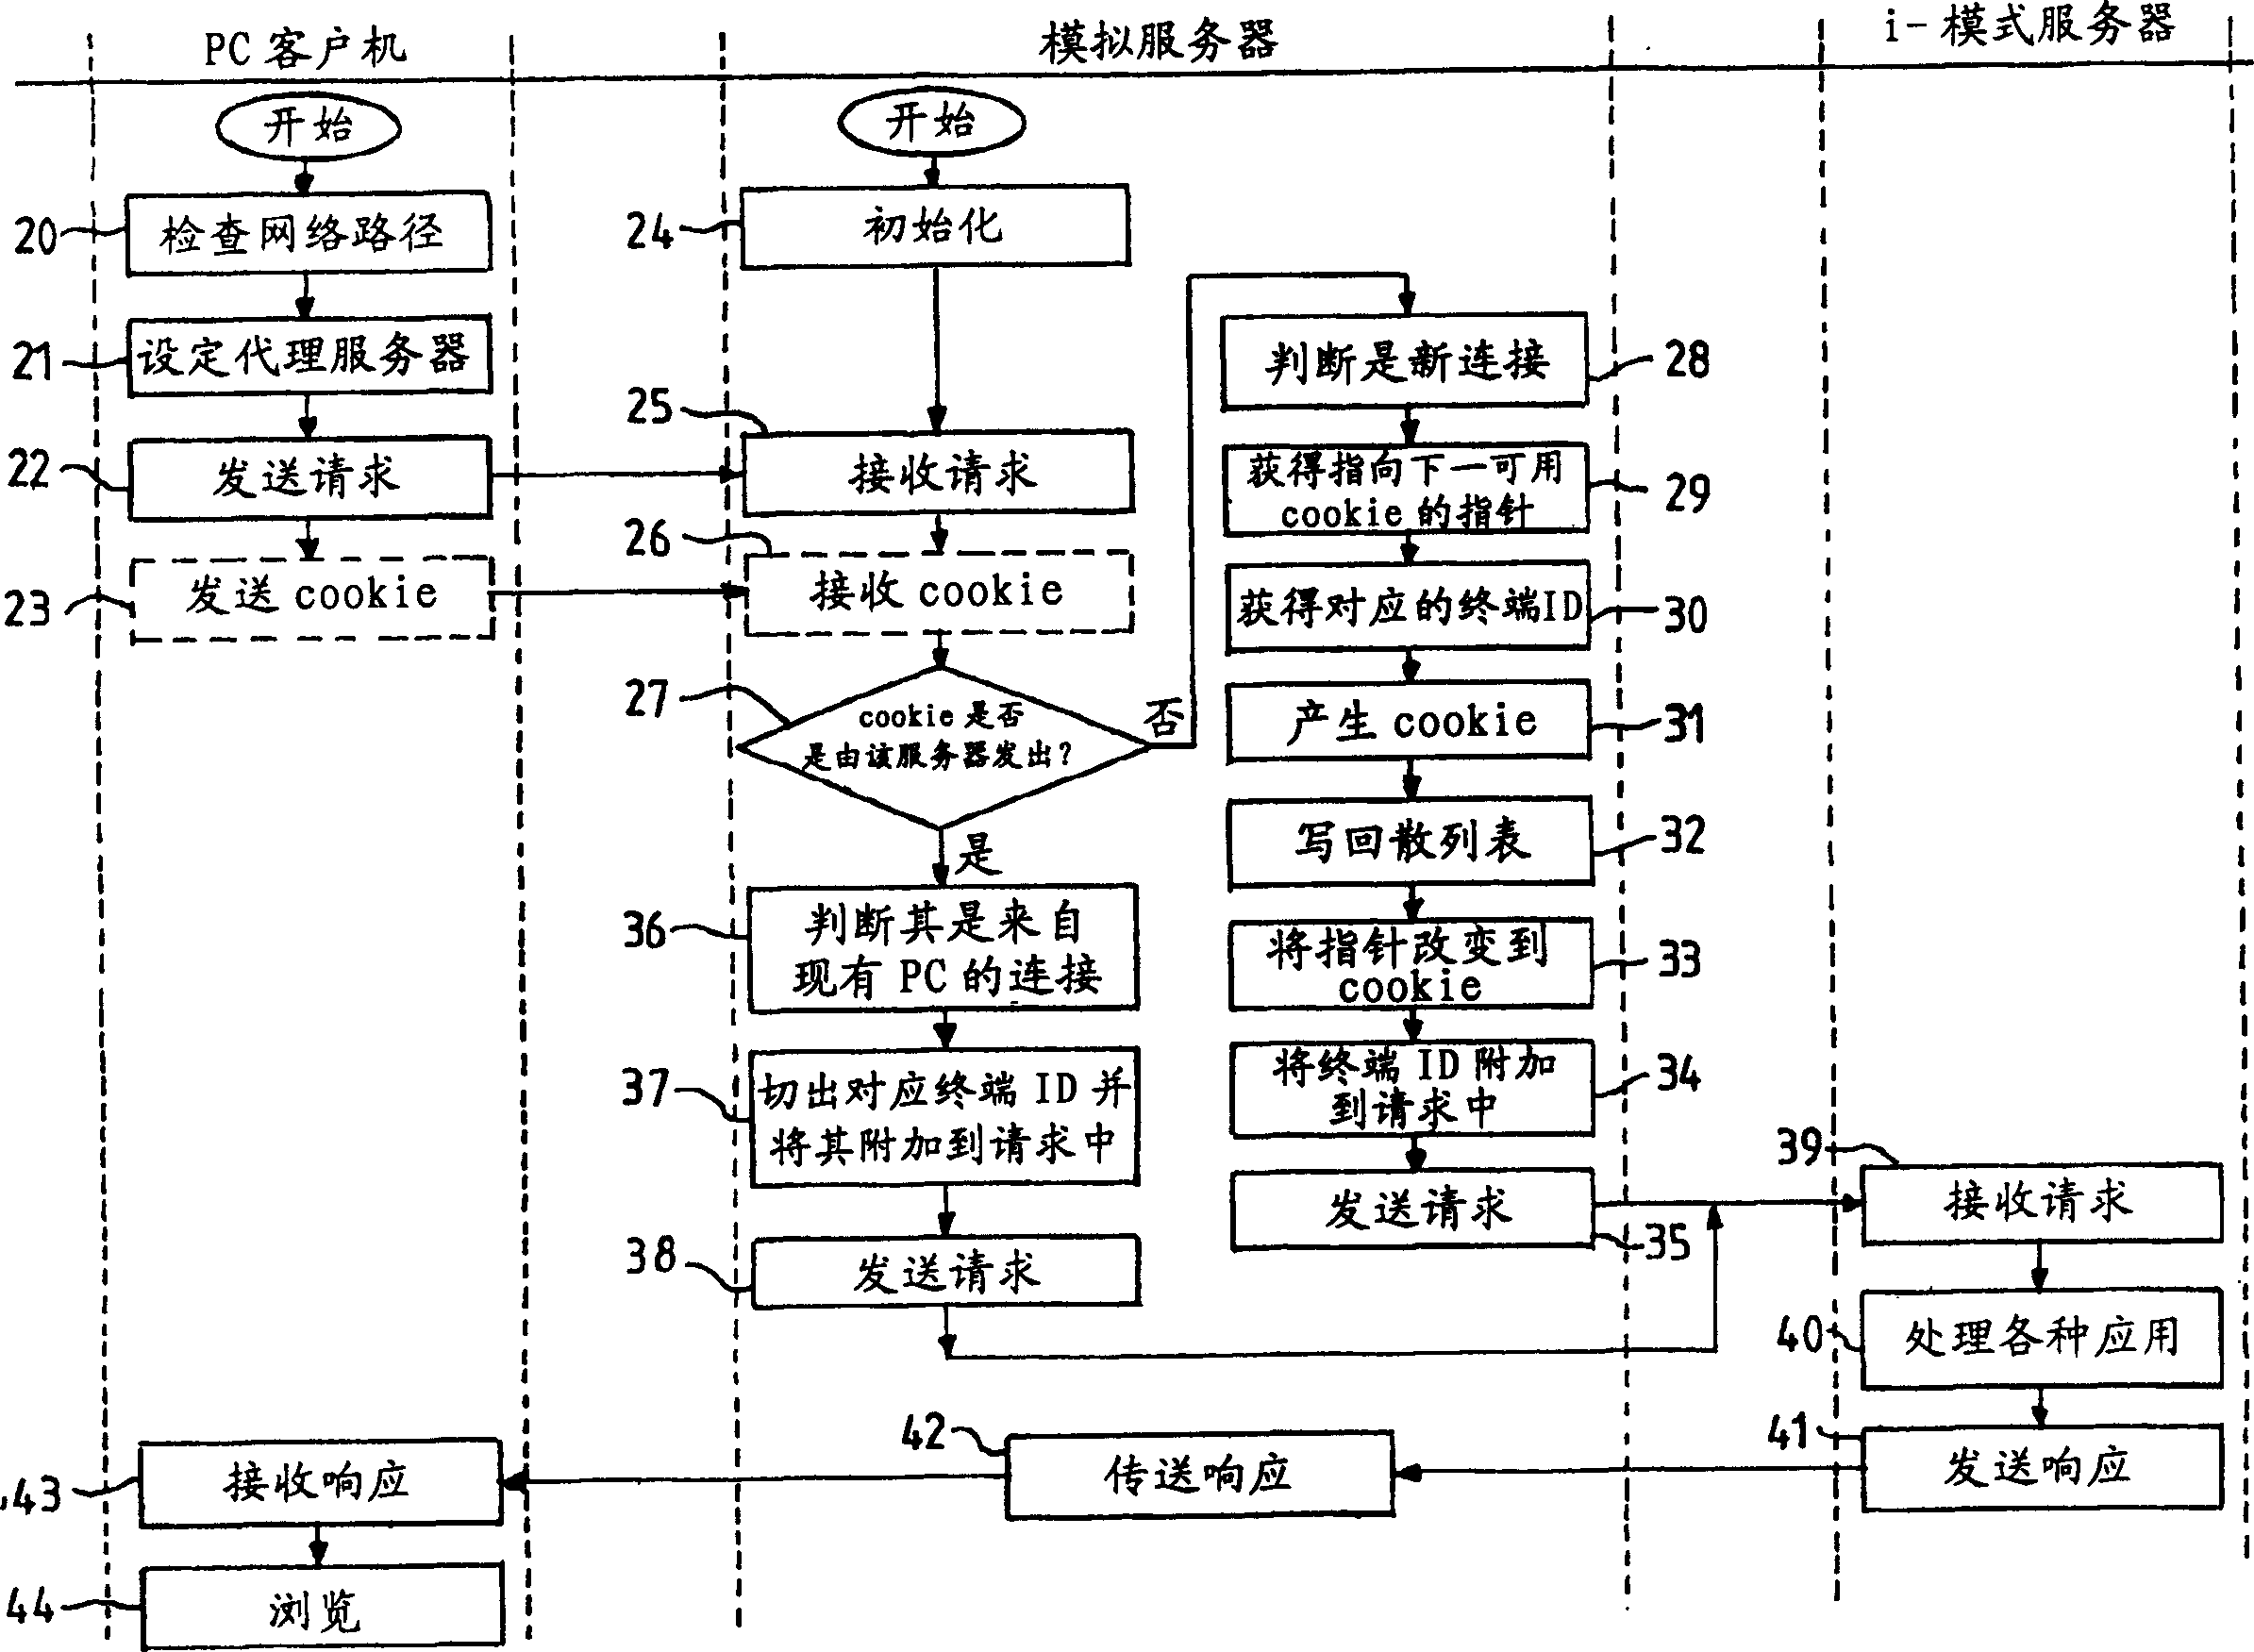 System communication between computer systems